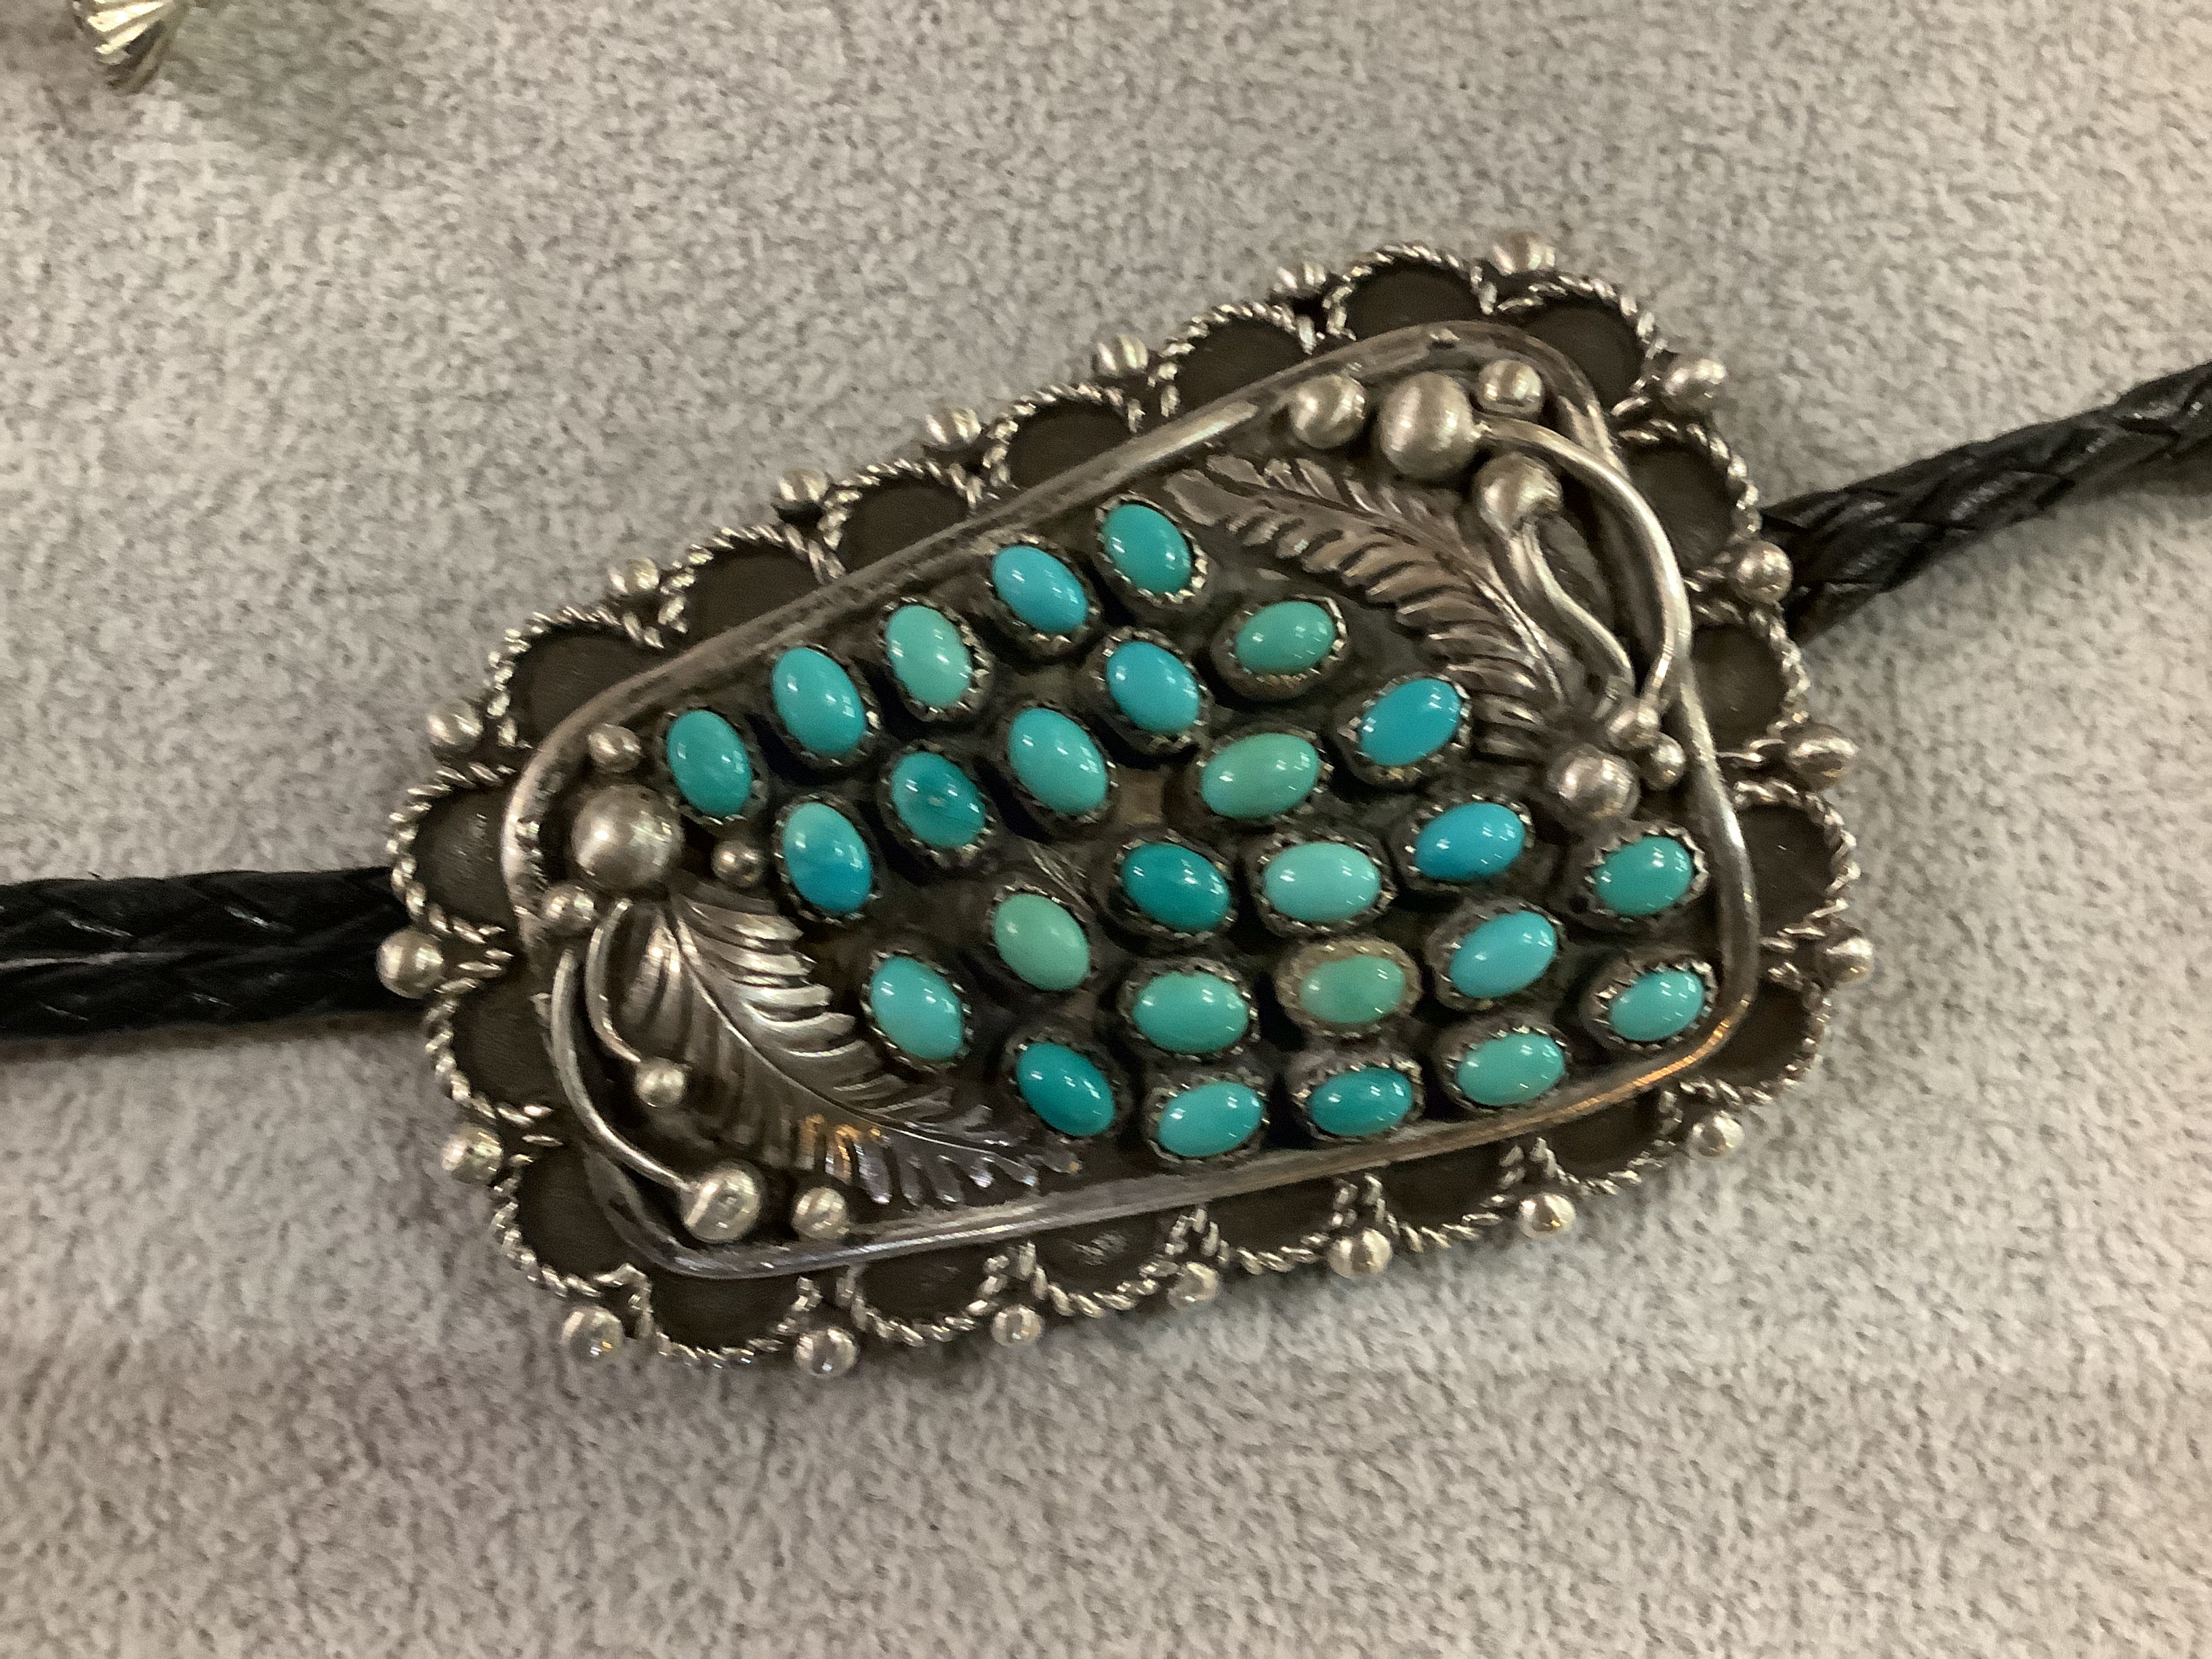 Vintage - Heavy Sterling Silver and Turquoise Needlepoint Bolo Tie